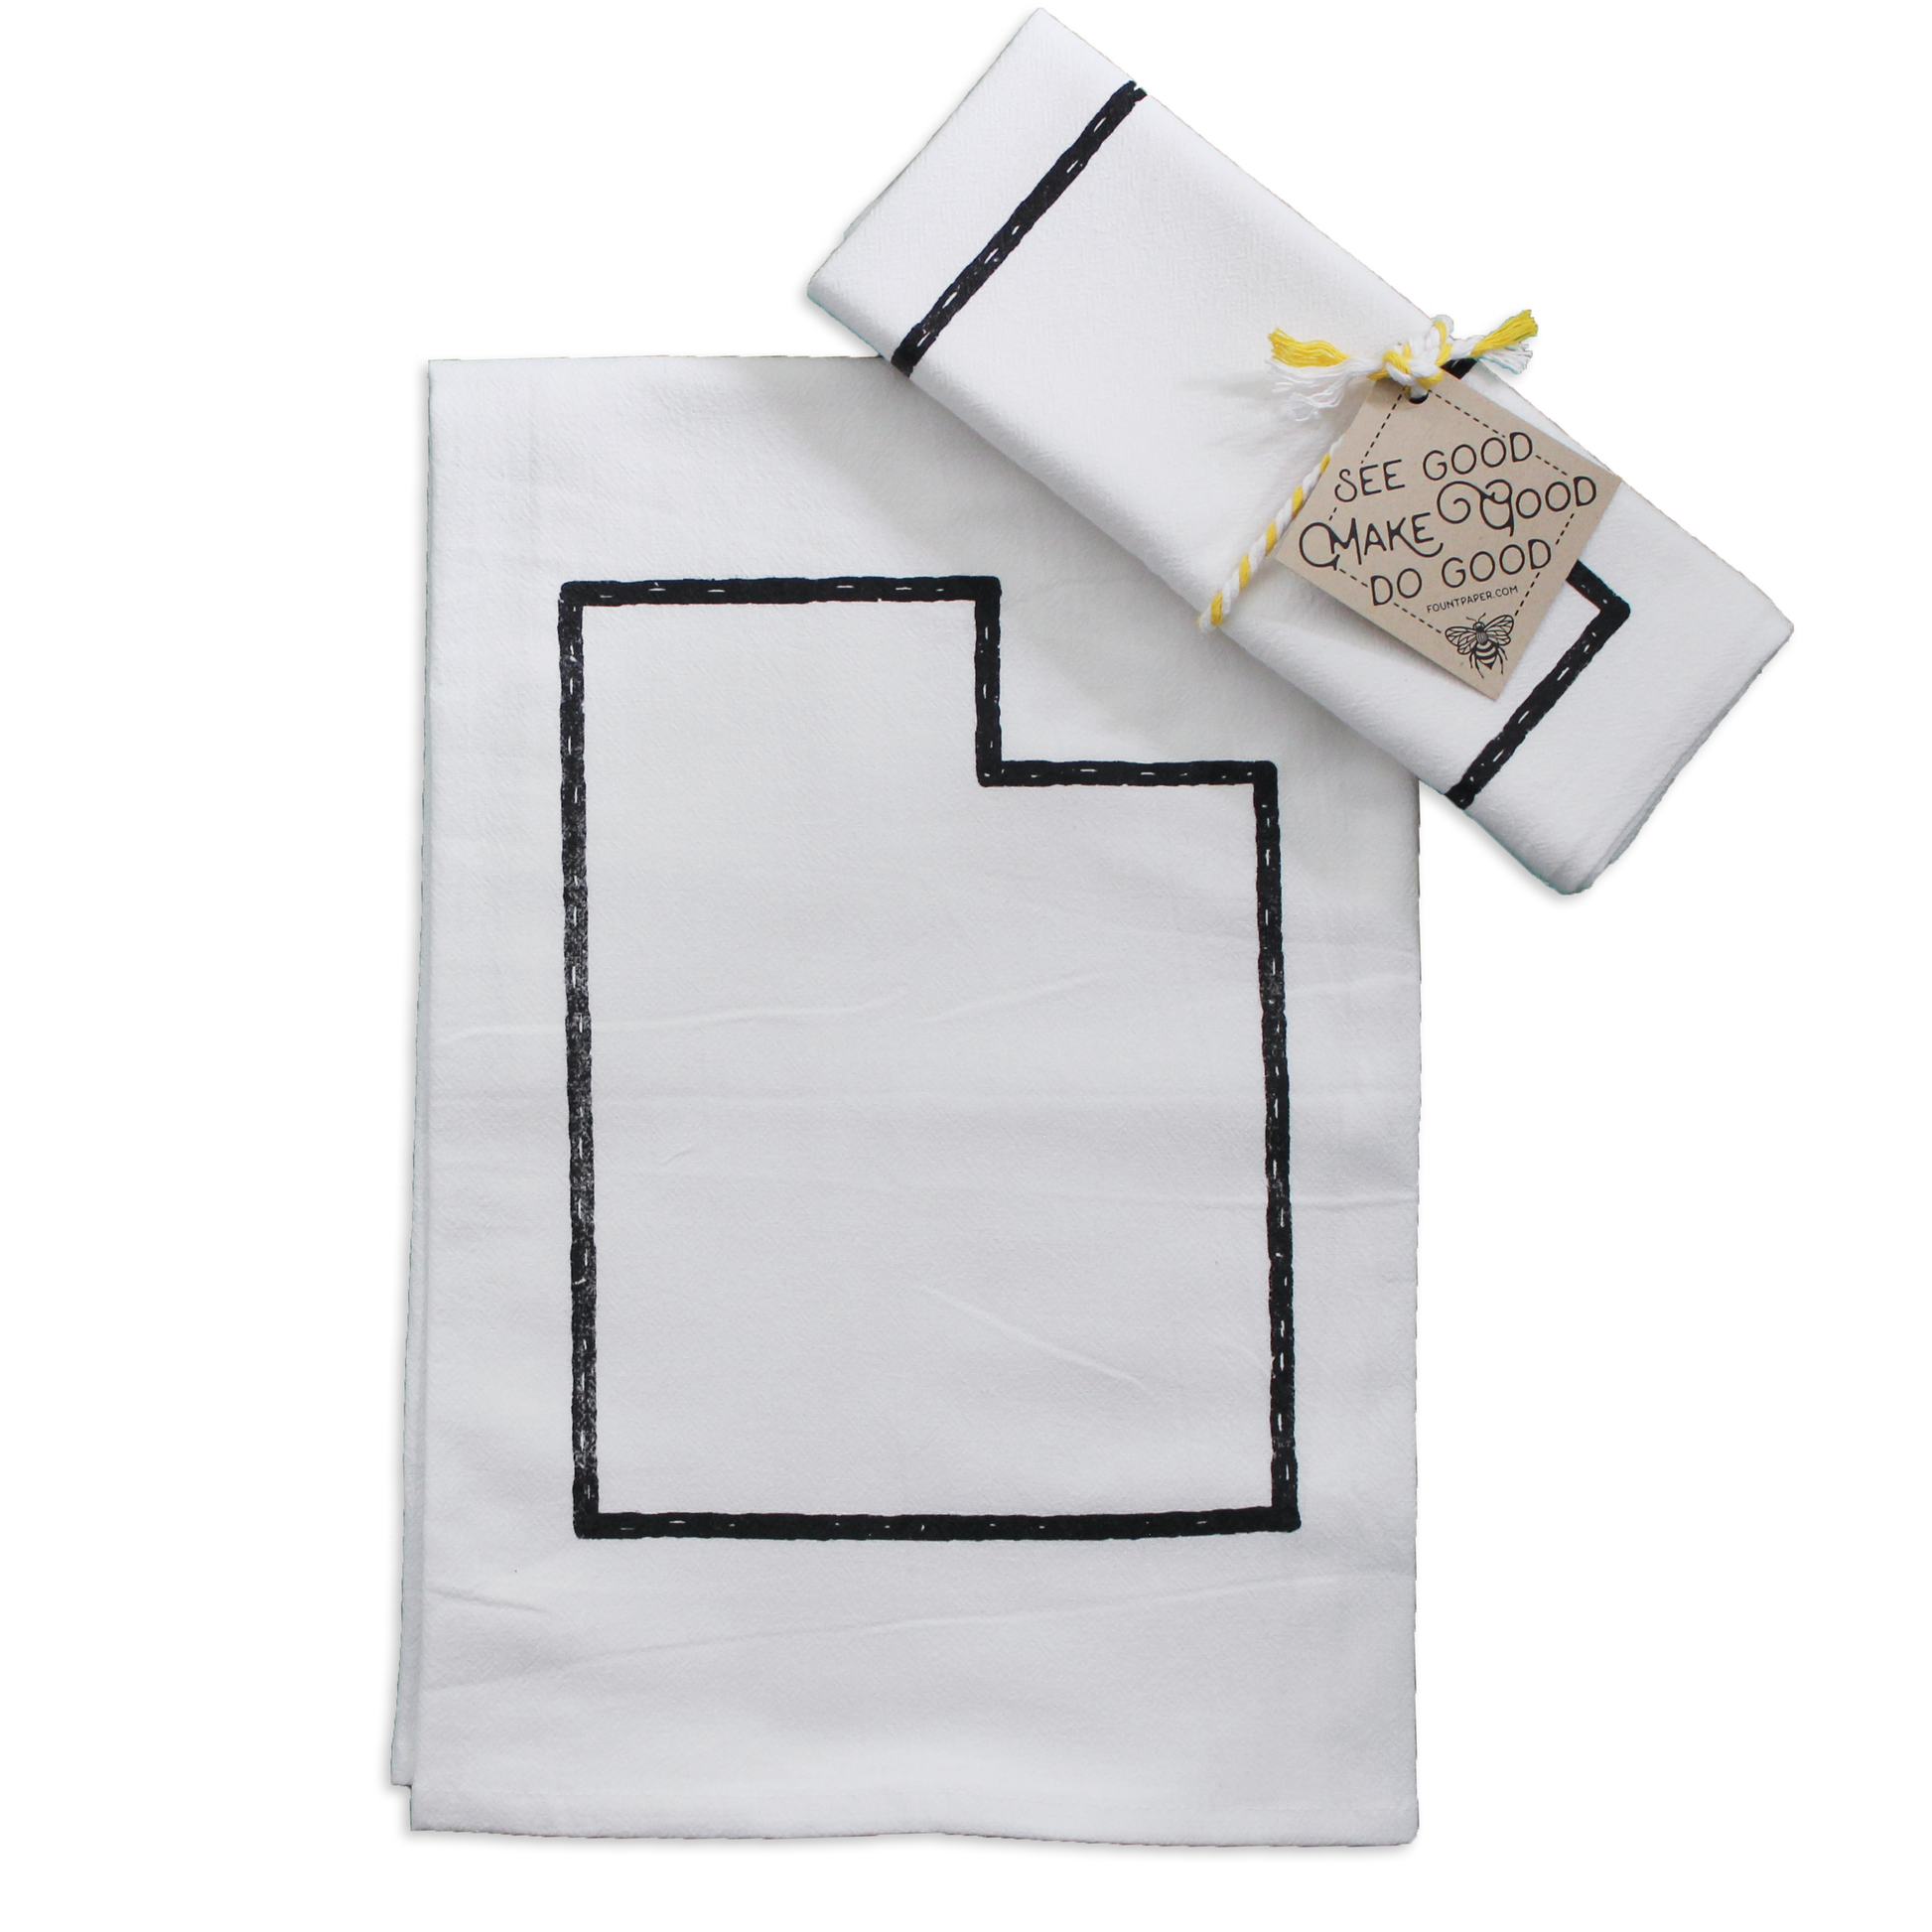 An outline of the state of utah printed in black on a kitchen tea towel Wrapped in ribbon as a gift